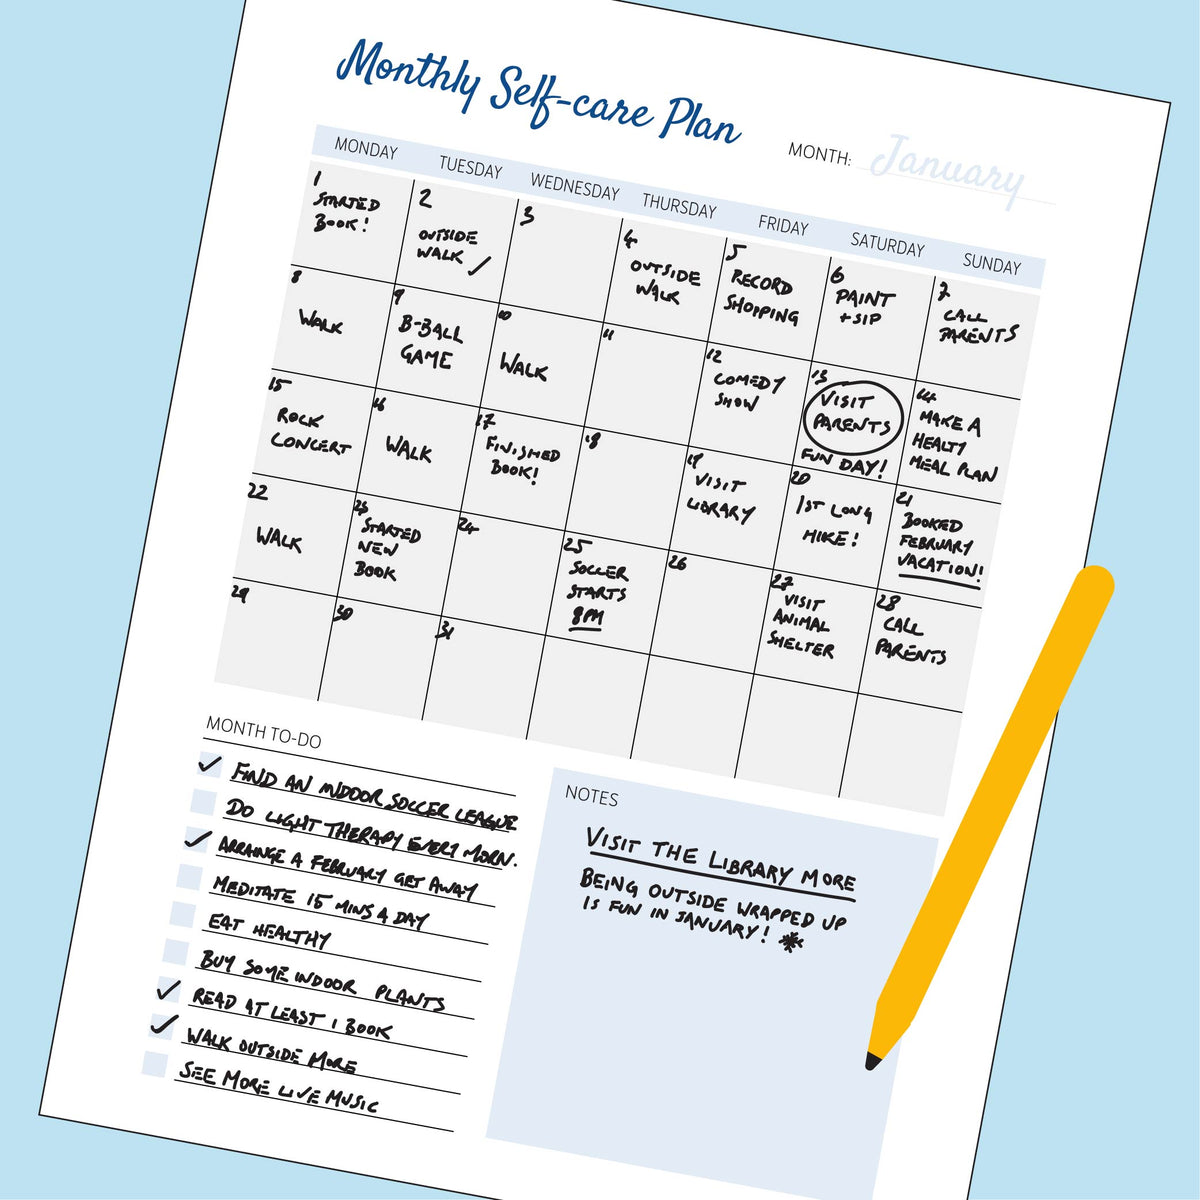 A graphic of a monthly self-care checklist